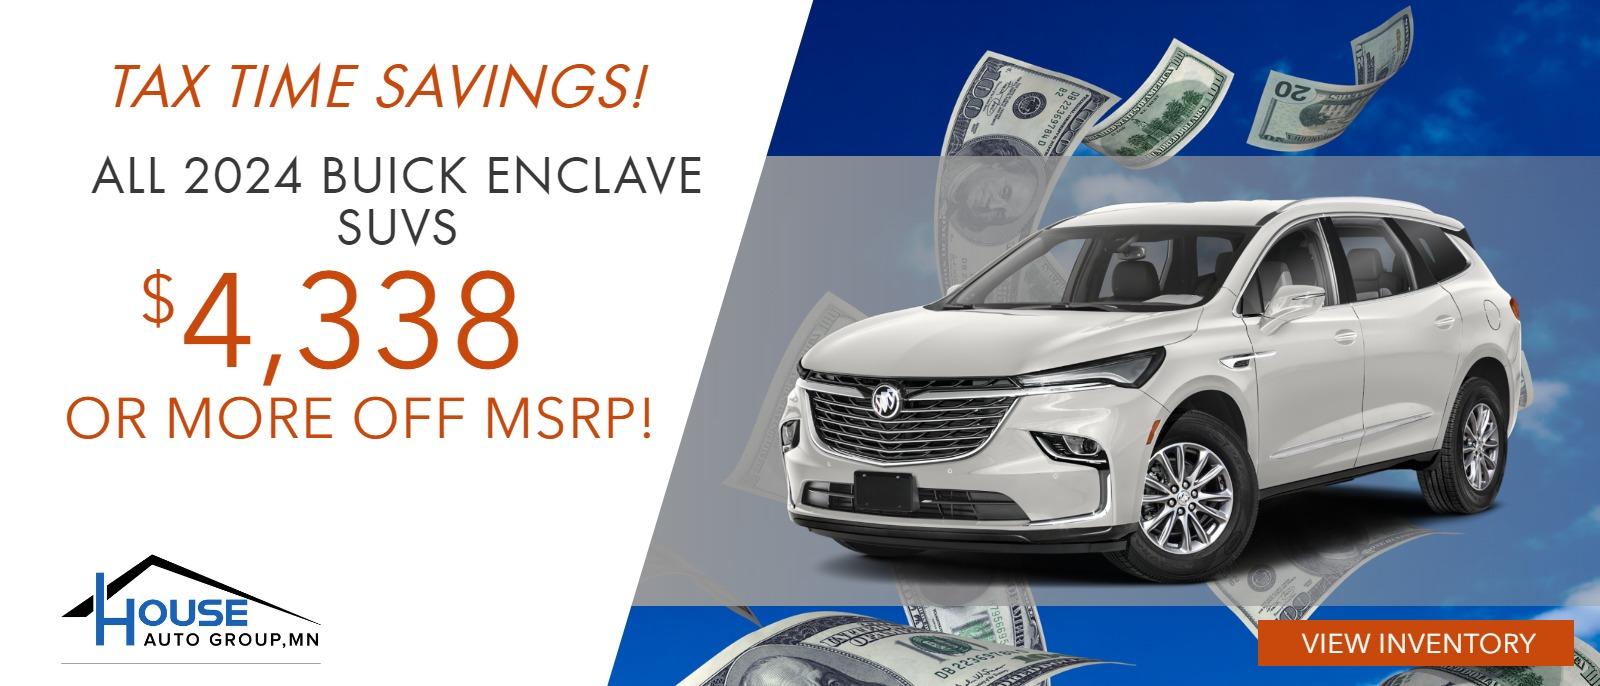 ALL 2024 Buick Enclave SUVs - $4,338 Or More Off MSRP!